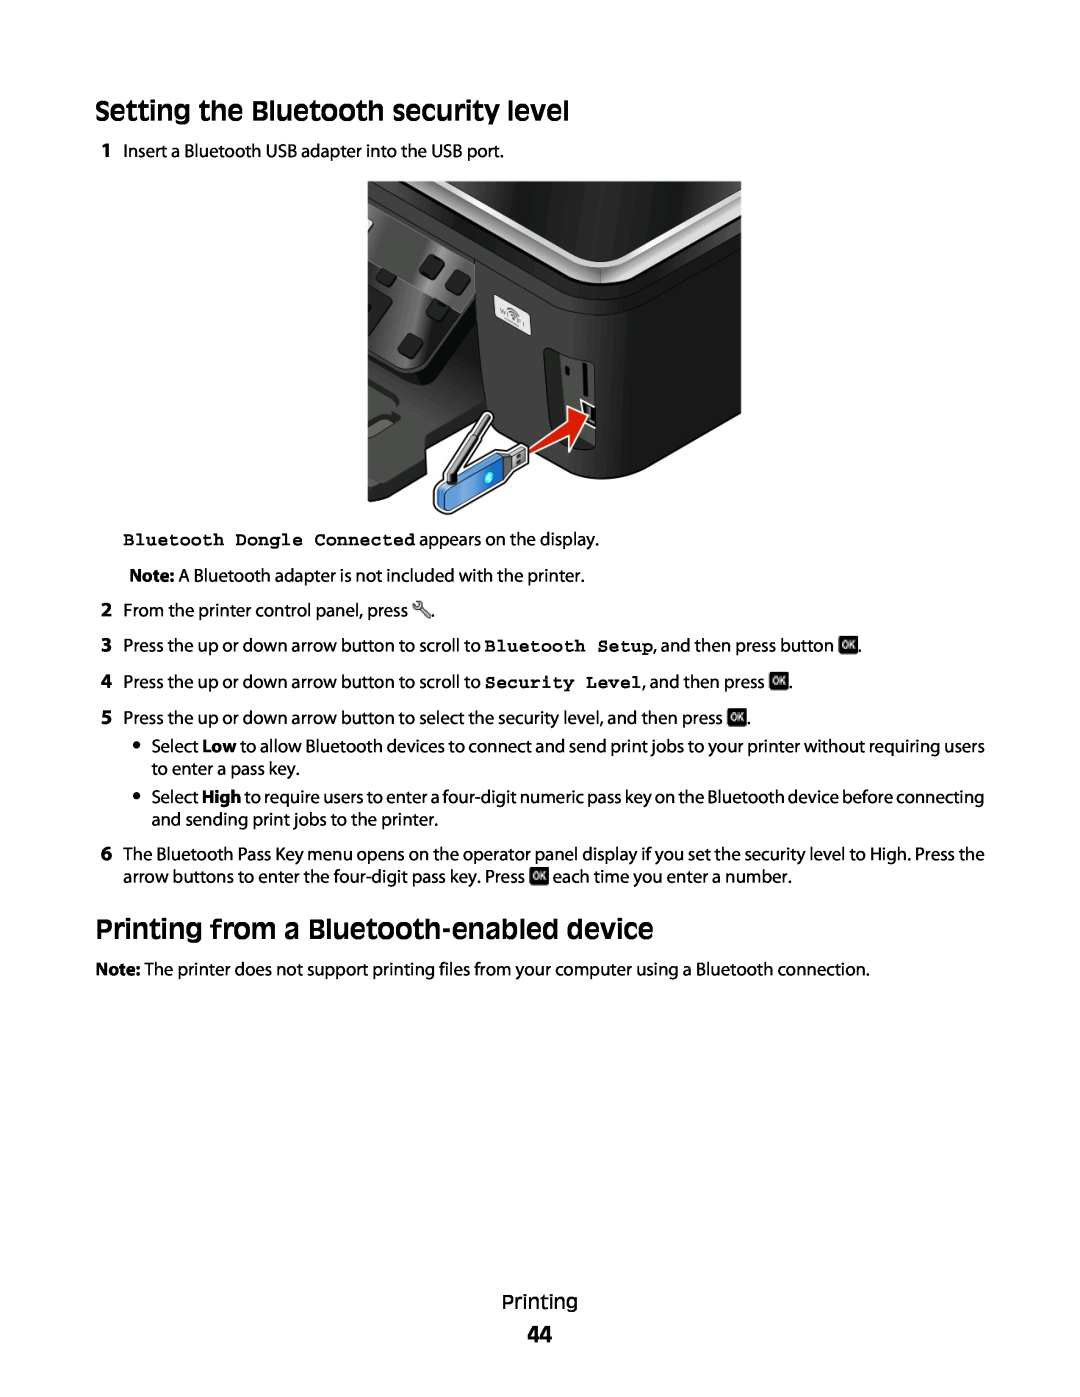 Lexmark 301, S500, 30E manual Setting the Bluetooth security level, Printing from a Bluetooth-enabled device 